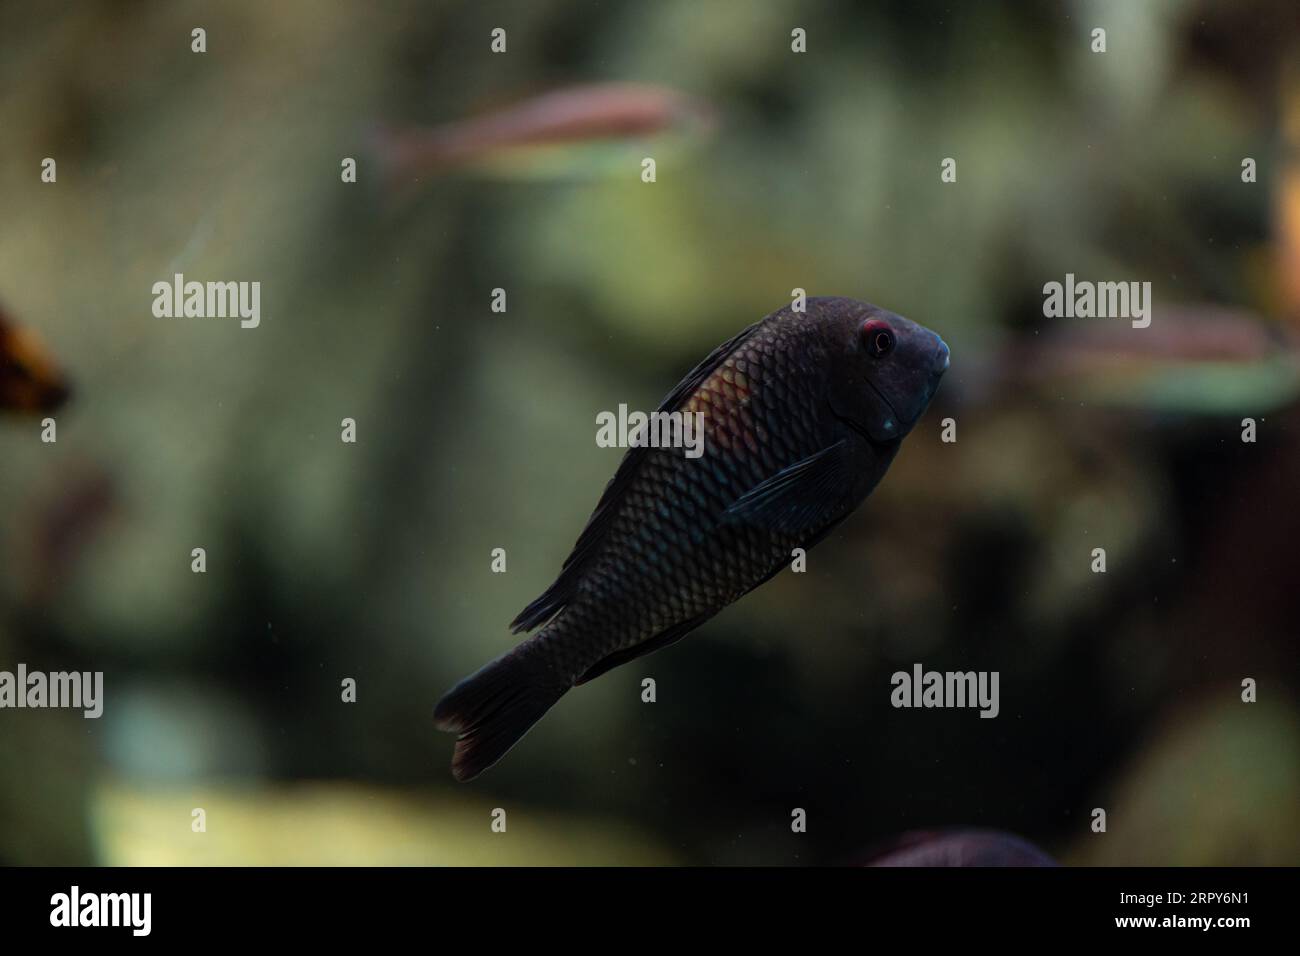 Aquarium with many colorful African Cichlids from Malawi lake, dark background Stock Photo